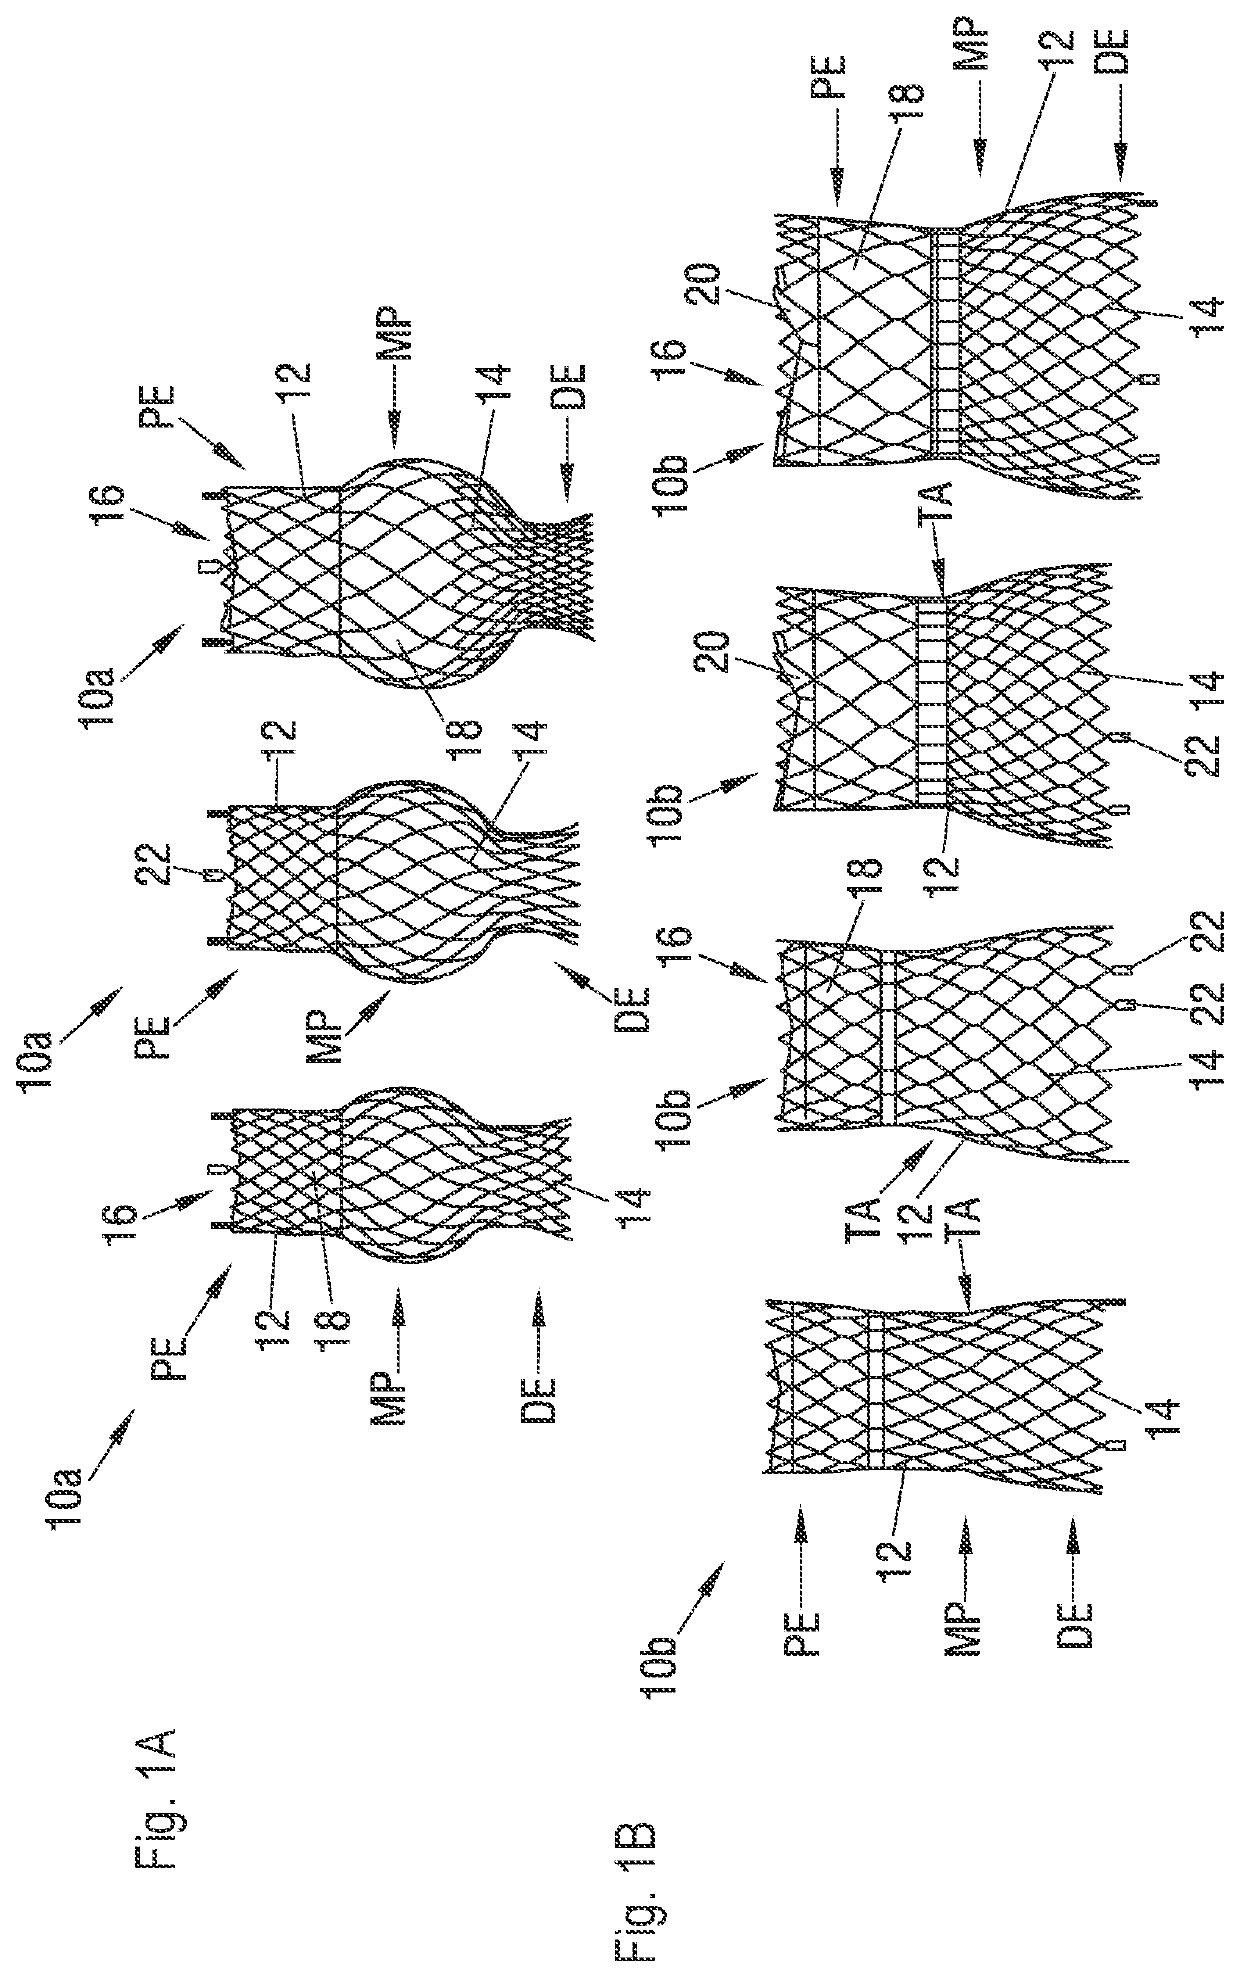 Self-expandable stent and set of stents